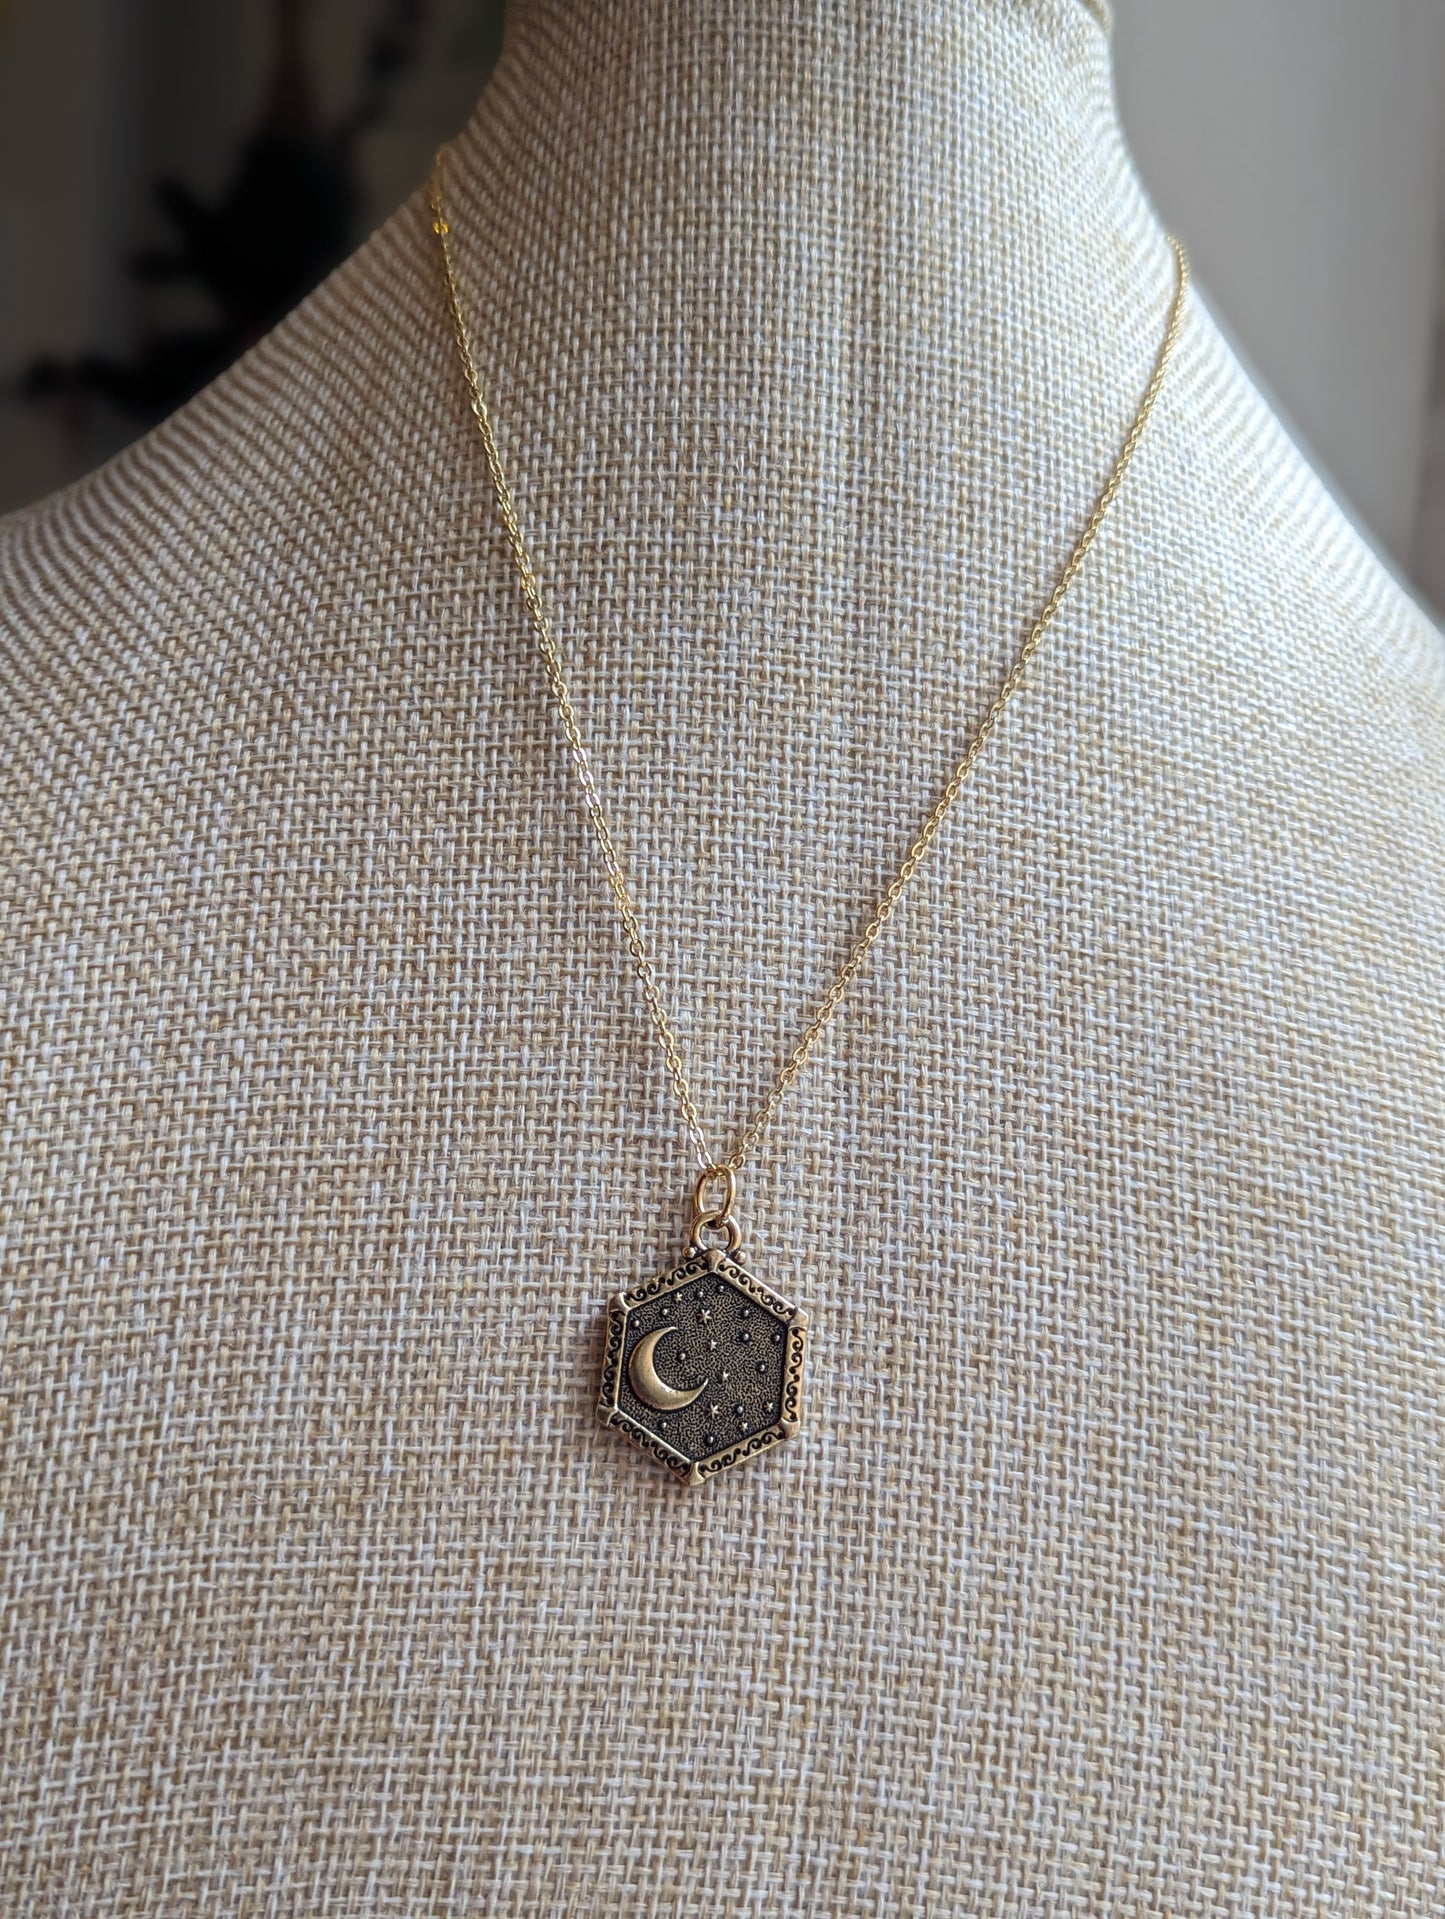 Double Sided Moon and Sun Necklace (Gold, Brass or Silver)